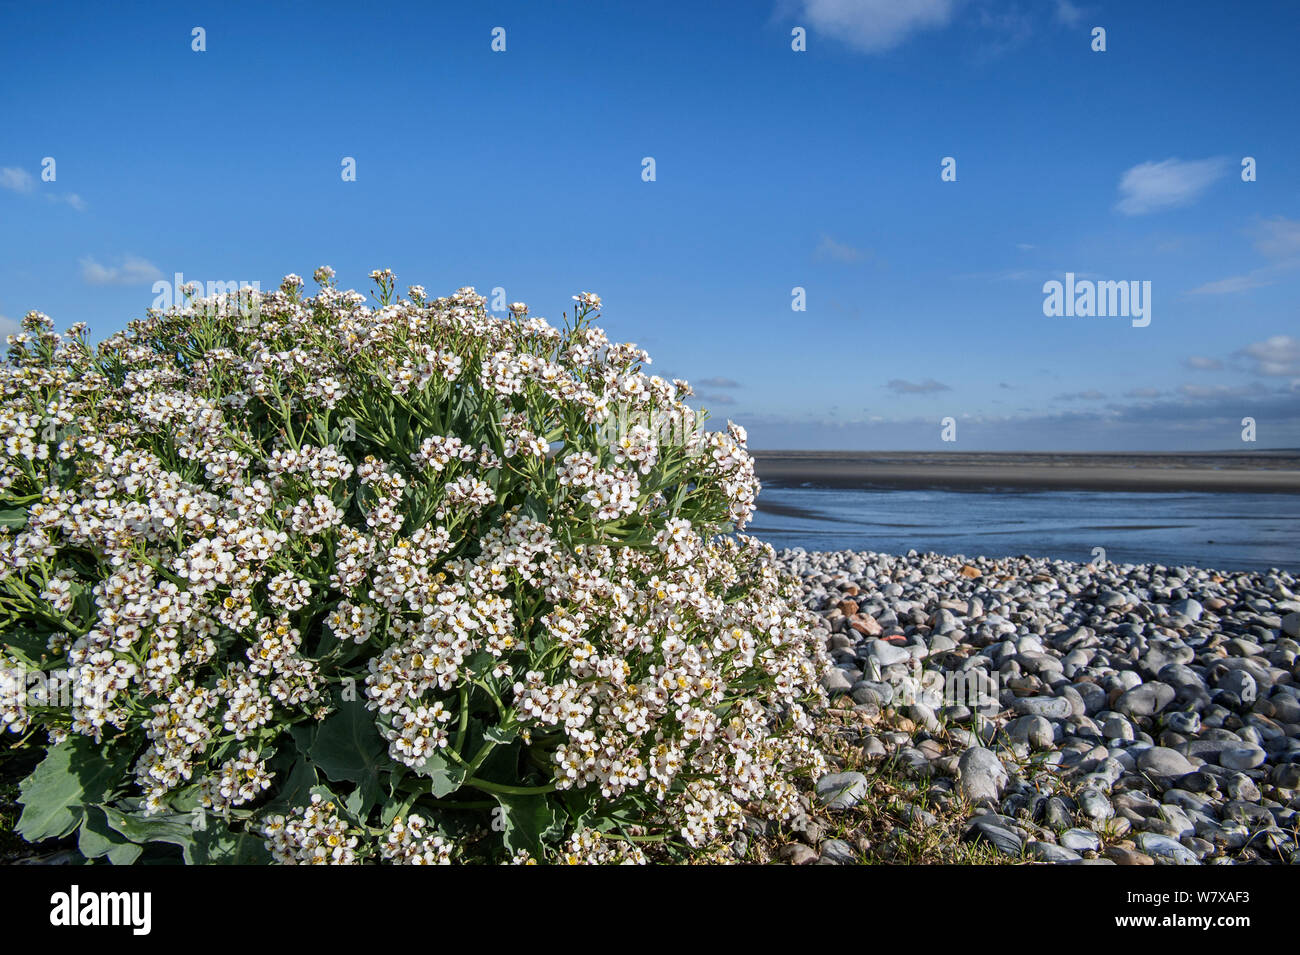 Sea kale (Crambe maritima) in flower on pebble beach, Bay of the Somme, Picardy, France. Stock Photo